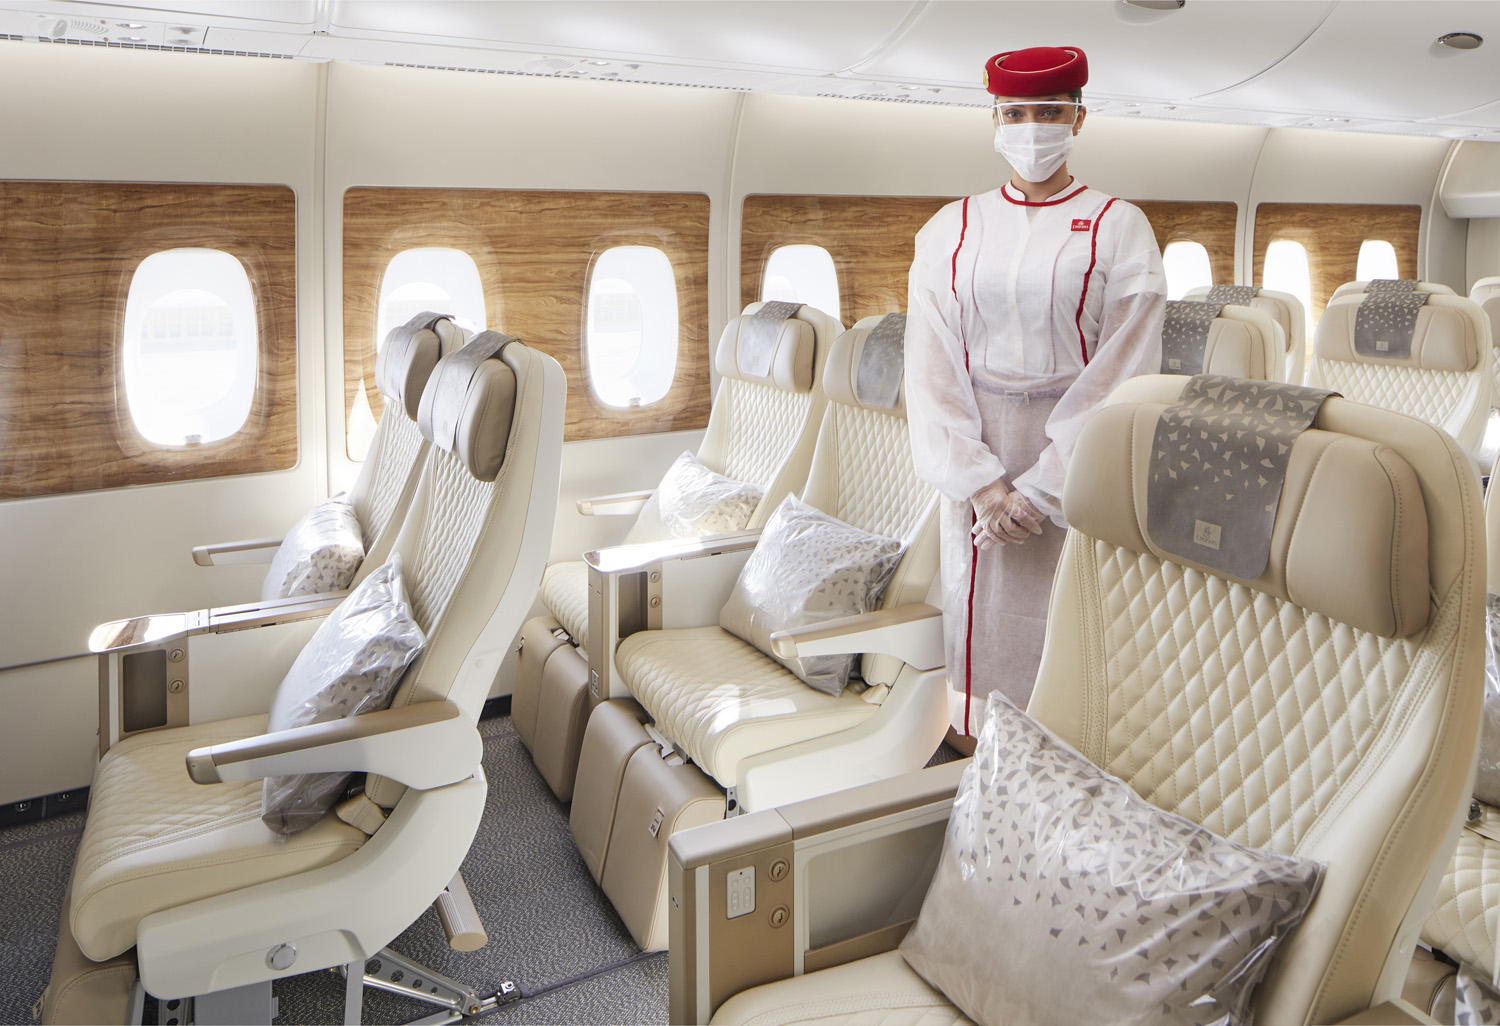 Dubai-London is first route for Emirates’ new Premium Economy Class